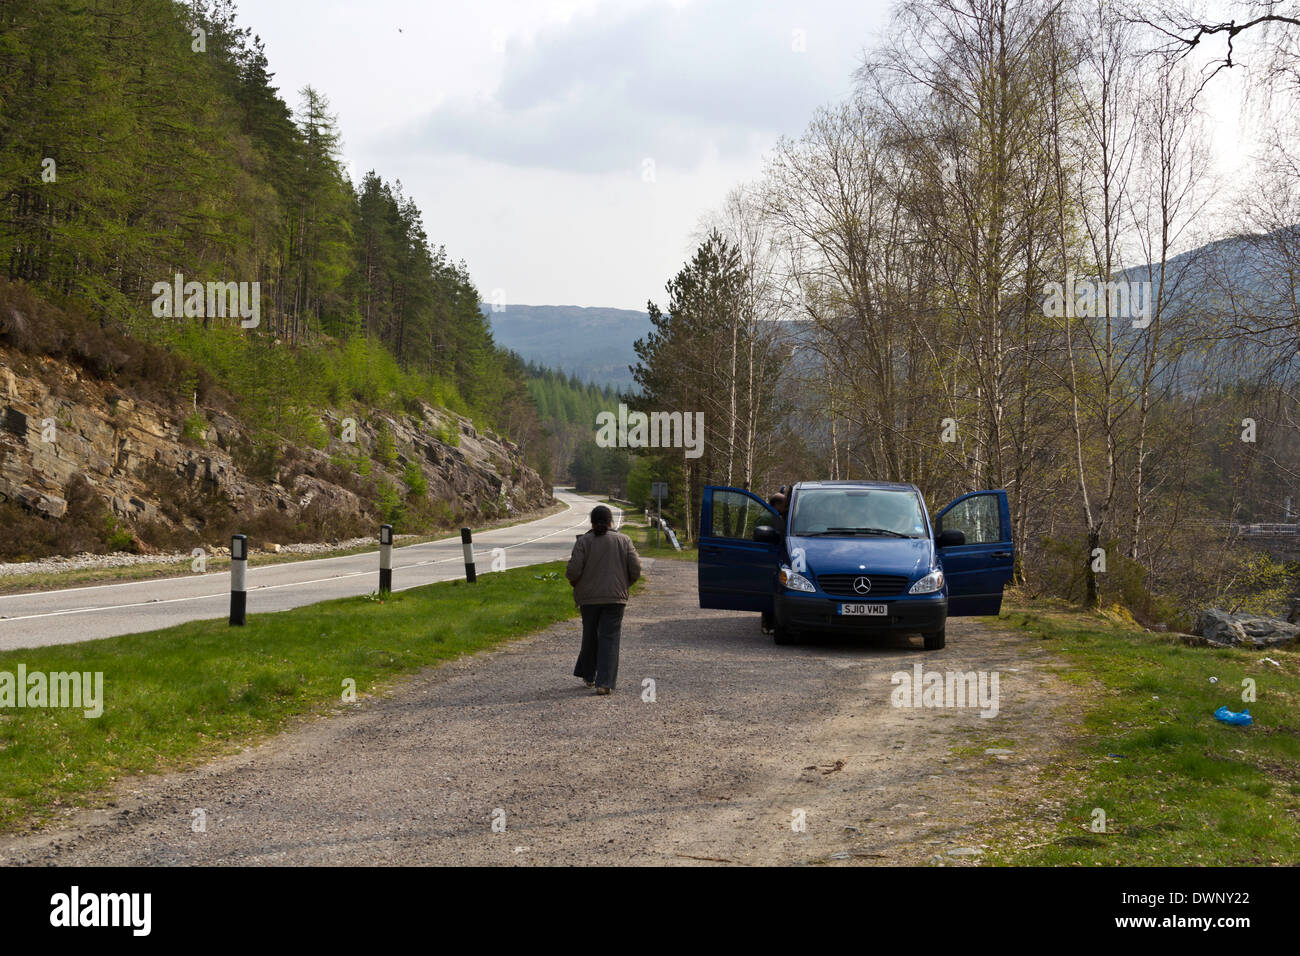 Parking next to a Loch in the Scottish Highlands, on a side parking road with greenery all around. Lady walking back to open van Stock Photo